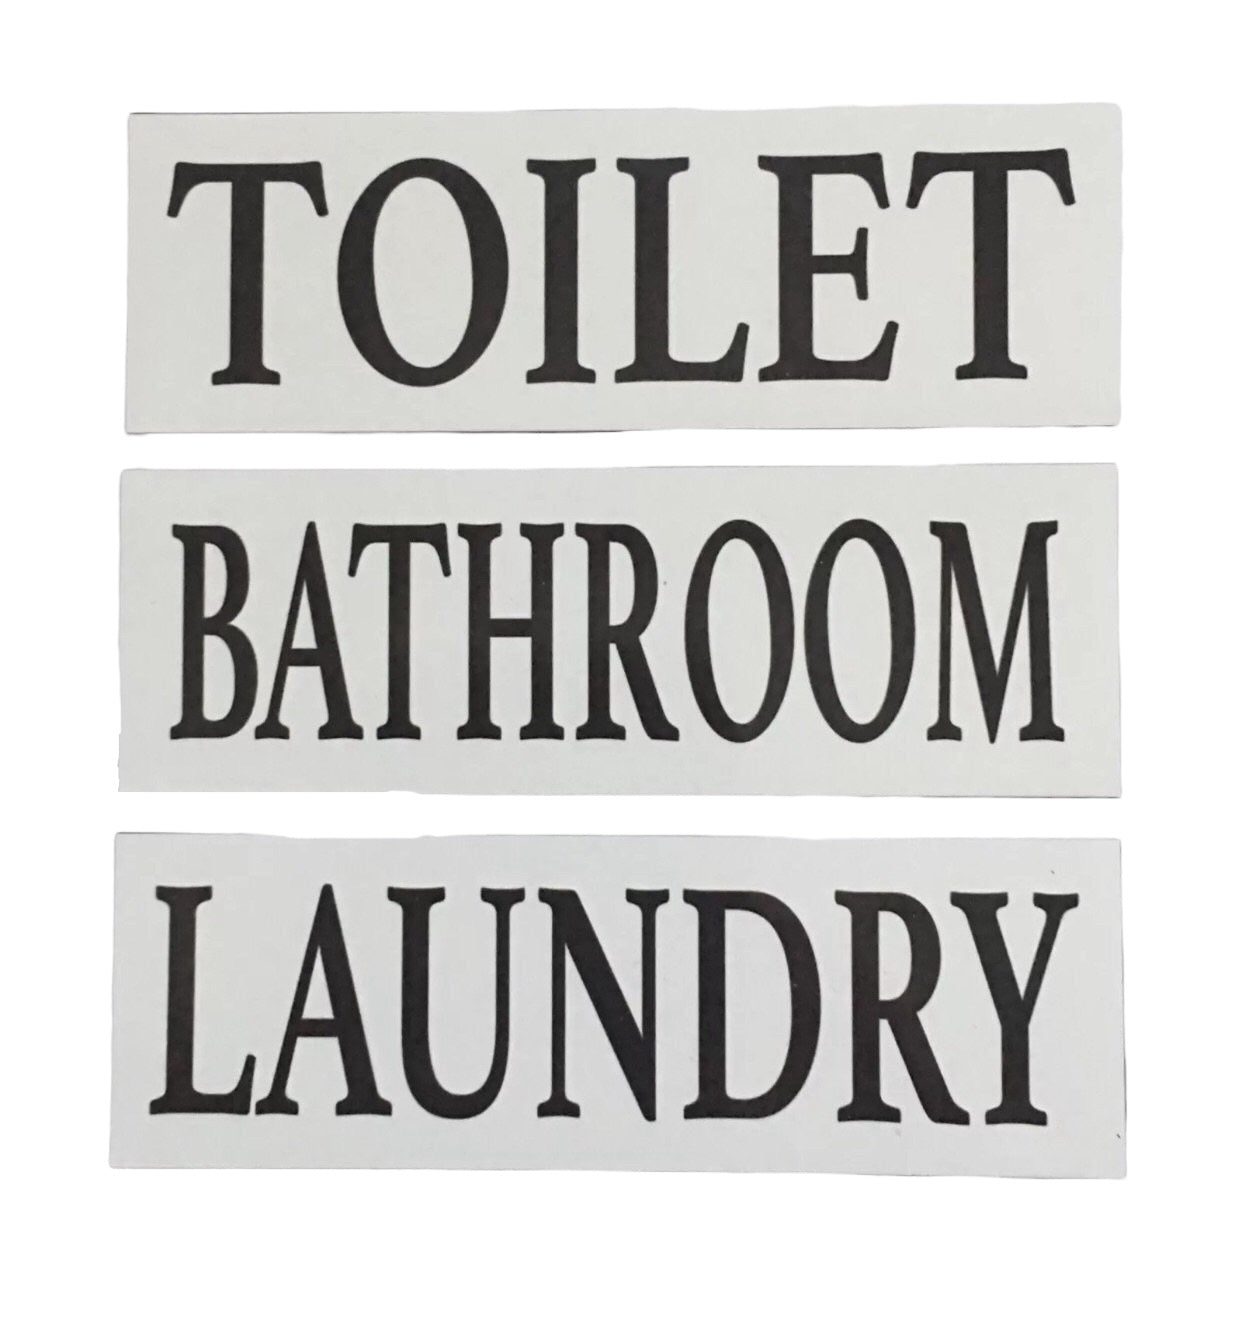 Toilet Laundry Bathroom White Door Room Sign - The Renmy Store Homewares & Gifts 